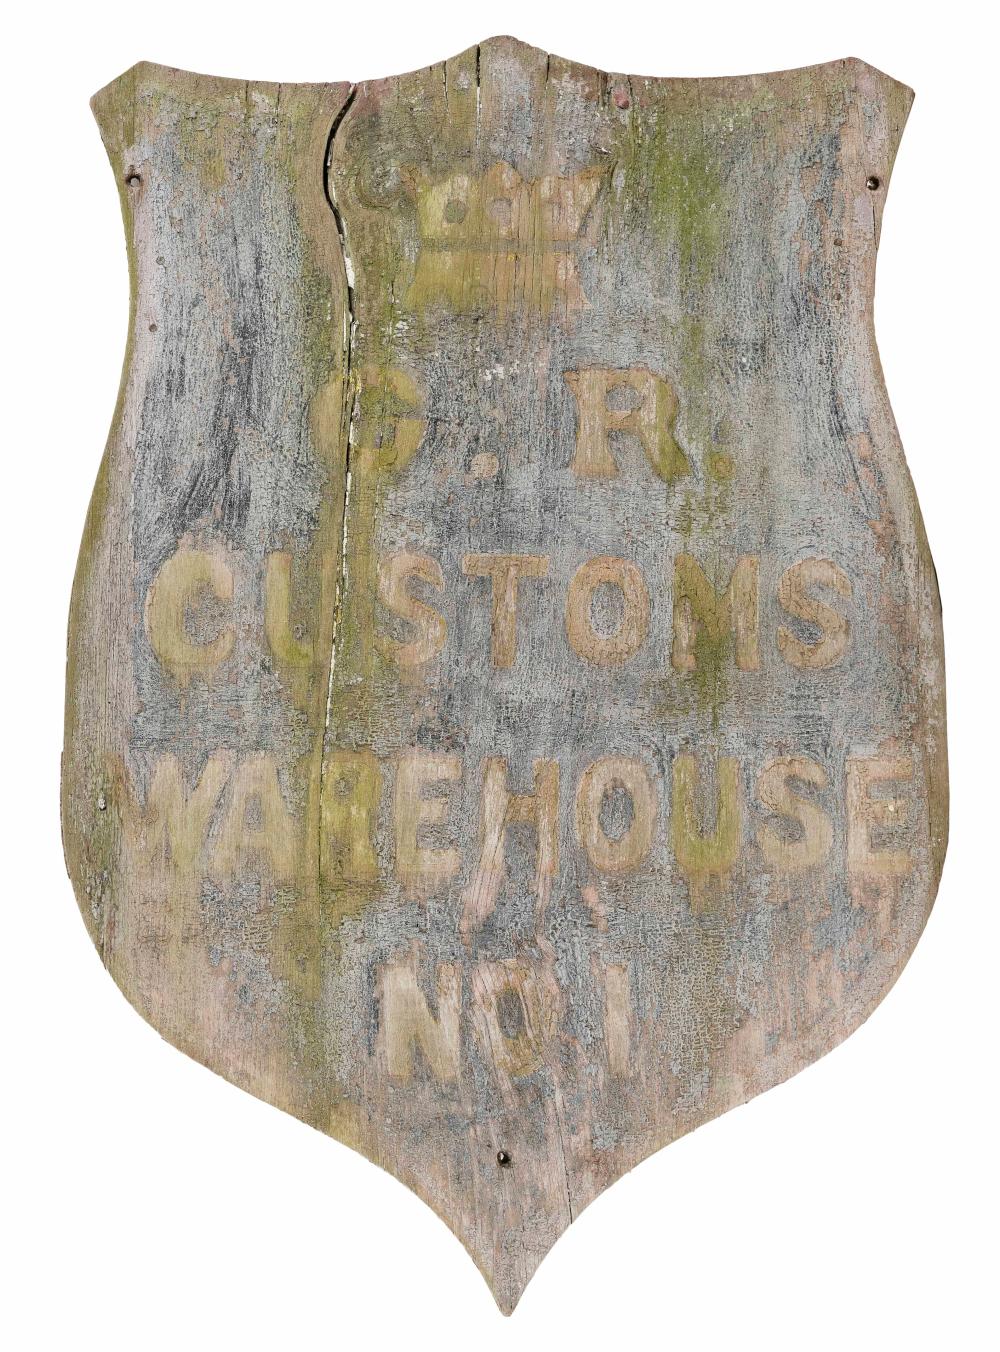 WOODEN SHIELD-FORM SIGN 19TH/20TH